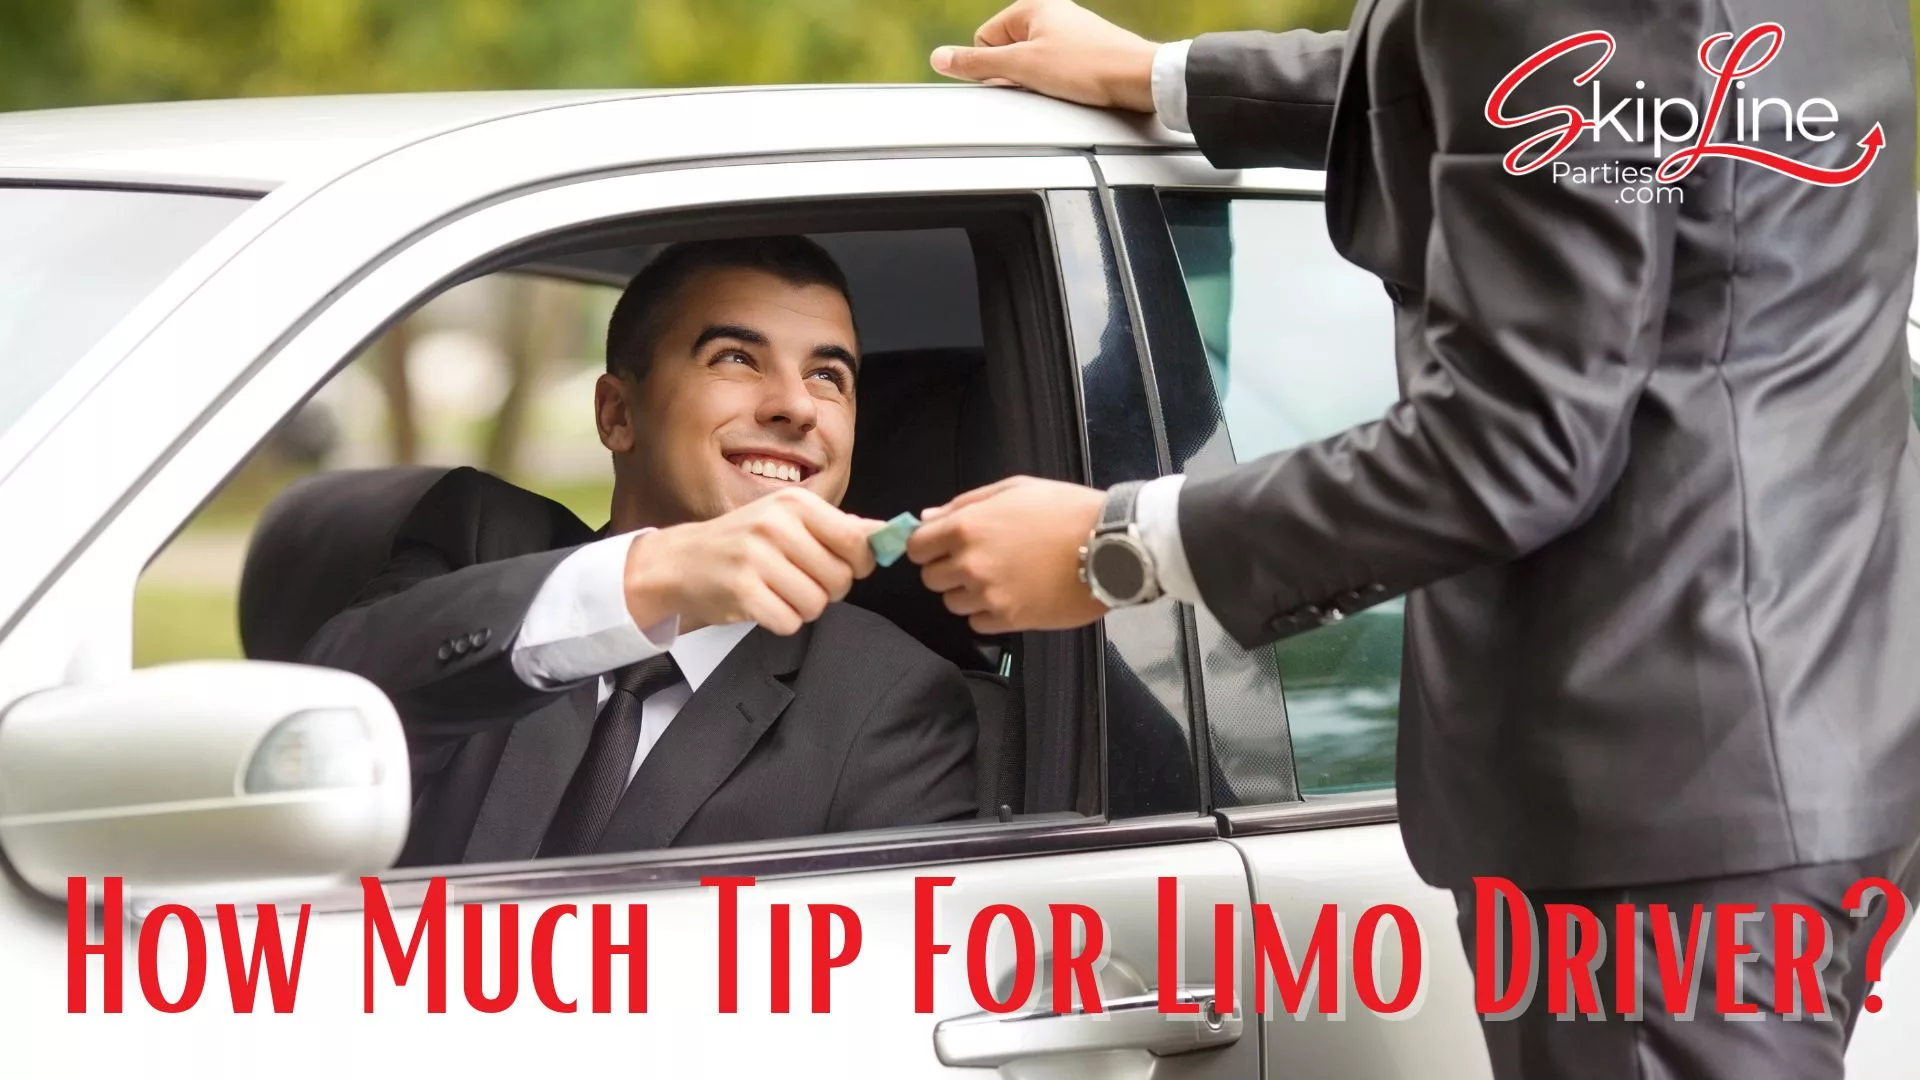 How Much Tip For Limo Driver? by Skipline Parties Edmonton